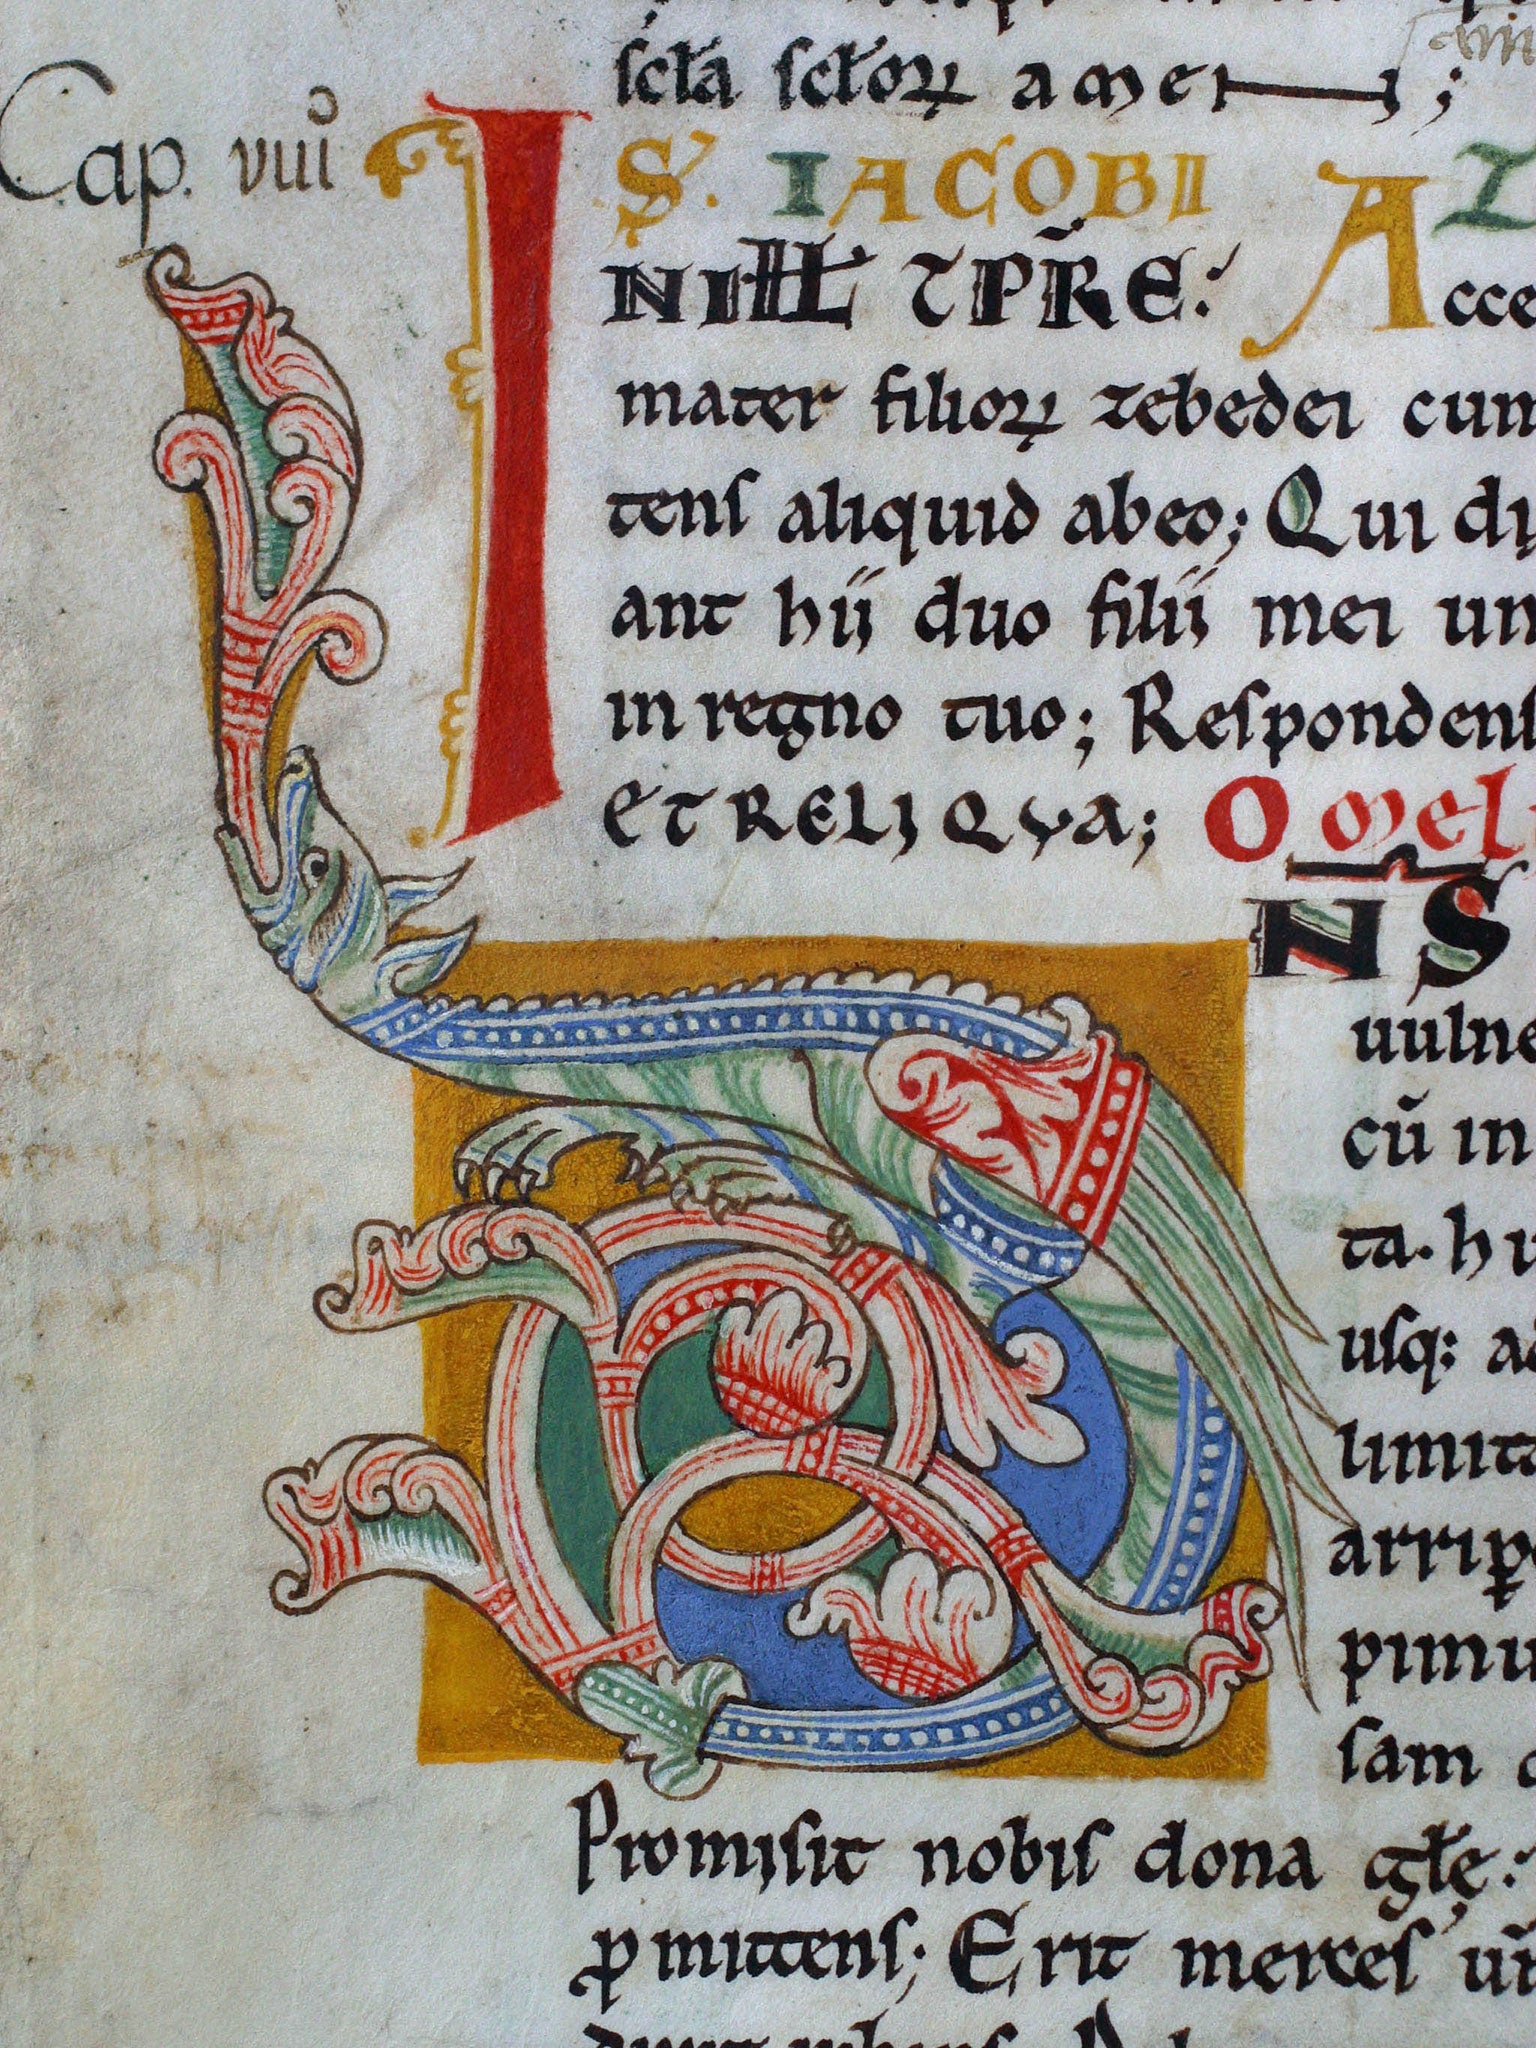 The Codex Calixtinus is the first guide for Christians travelling to Santiago de Compostela